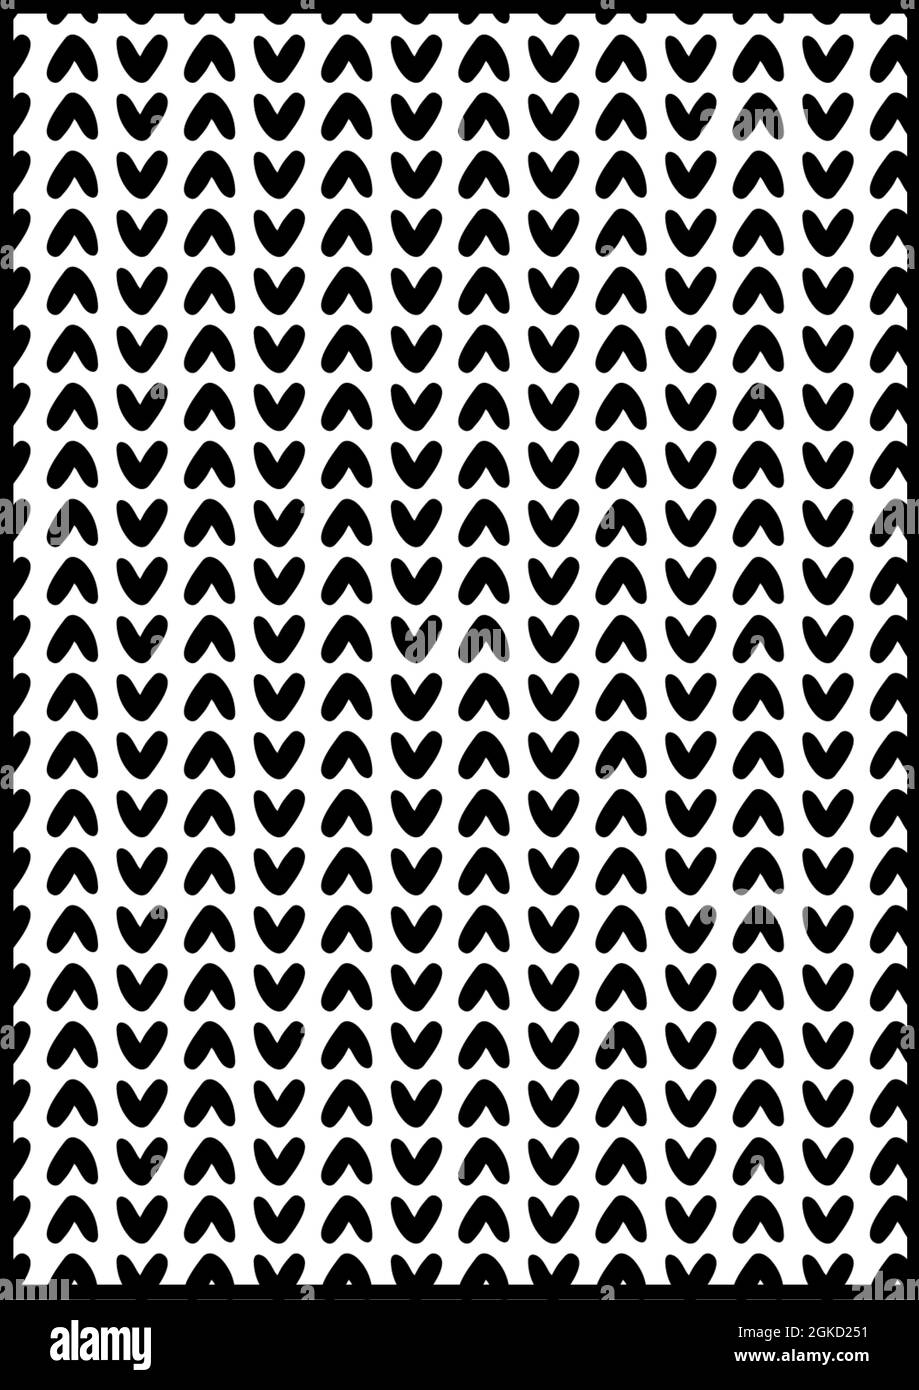 Digitally generated image of black abstract shapes in seamless pattern against white background Stock Photo